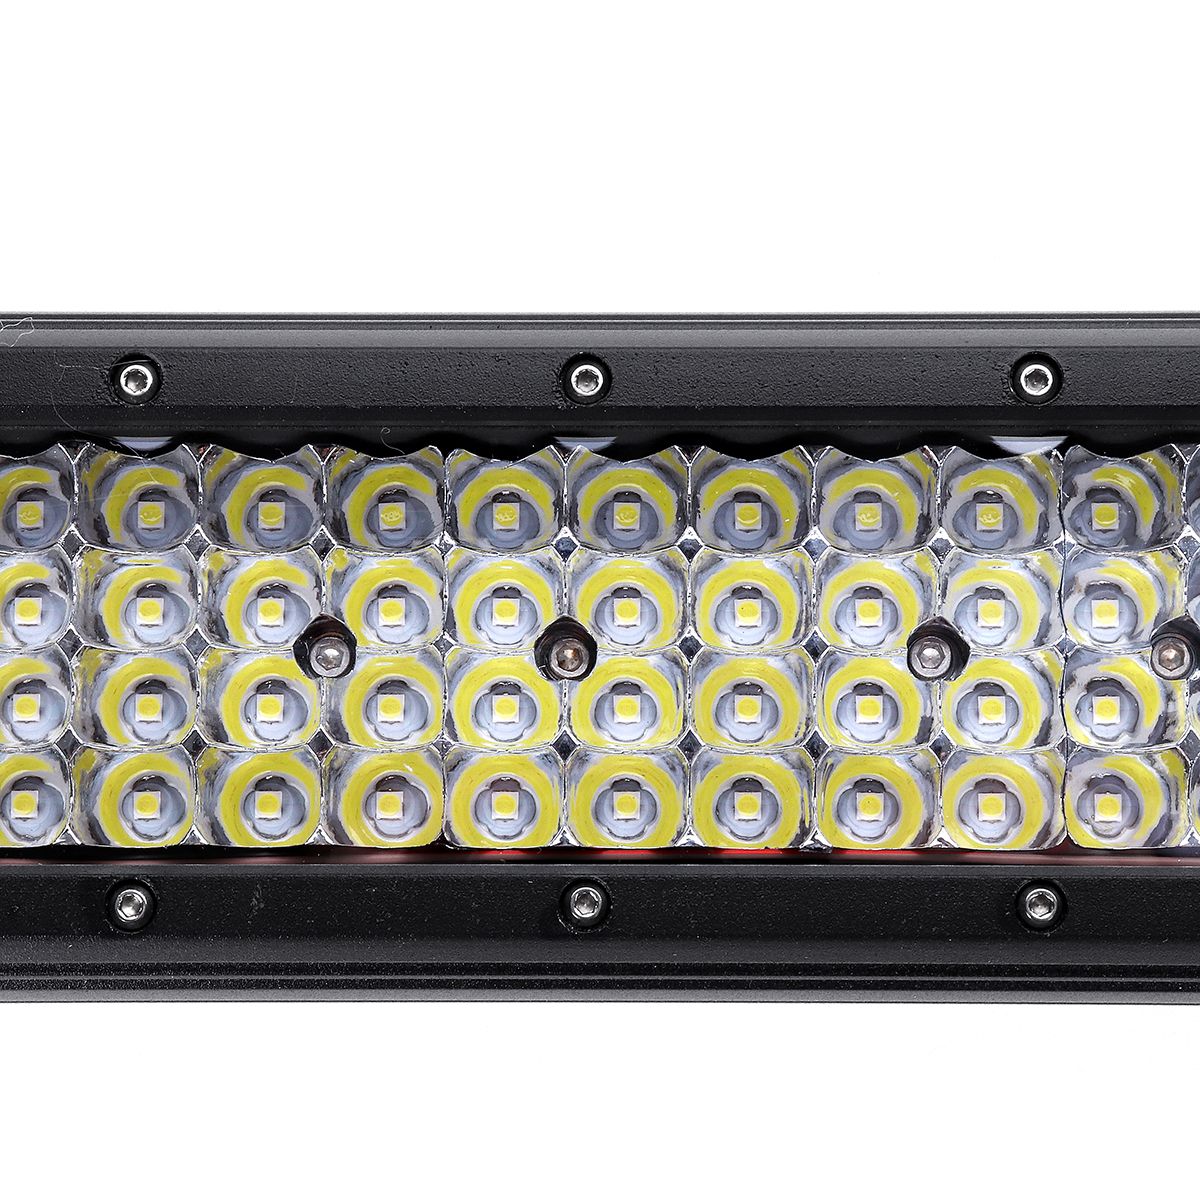 32Inch-LED-Work-Light-Bars-with-Side-Shooter-Combo-Beam-Fog-Lamp-672W-67200LM-for-Off-Road-ATV-1390764